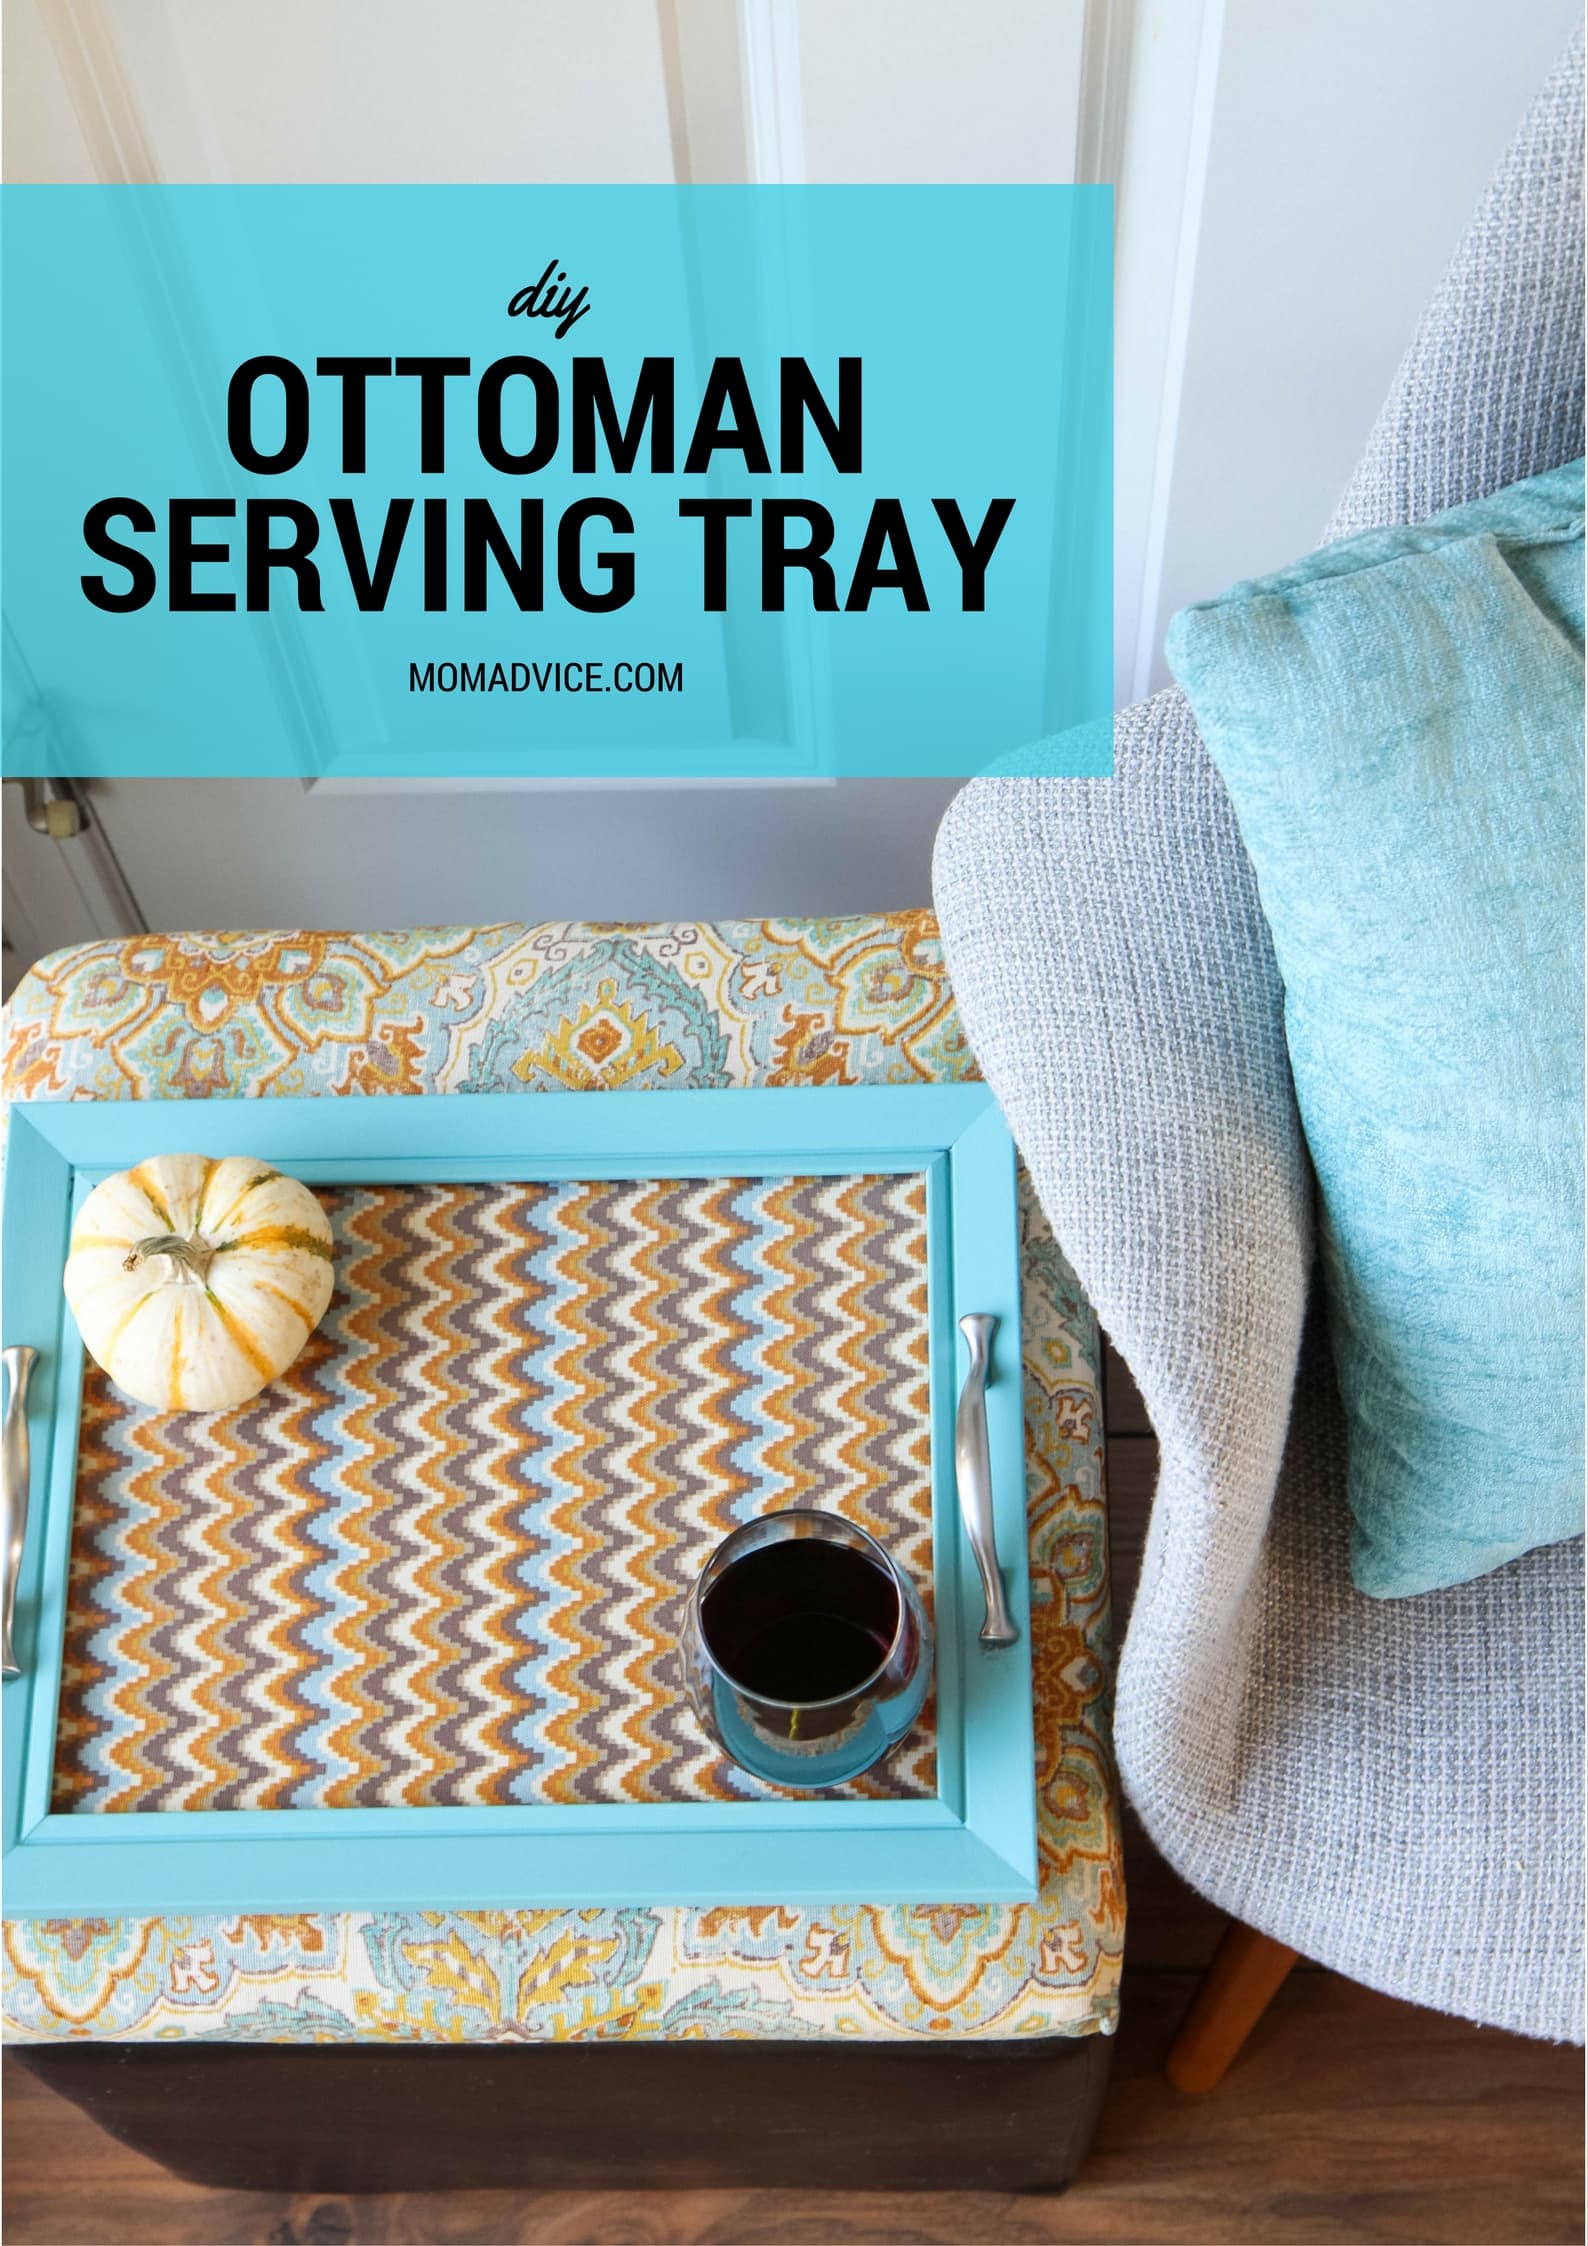 DIY Ottoman Serving Tray from MomAdvice.com